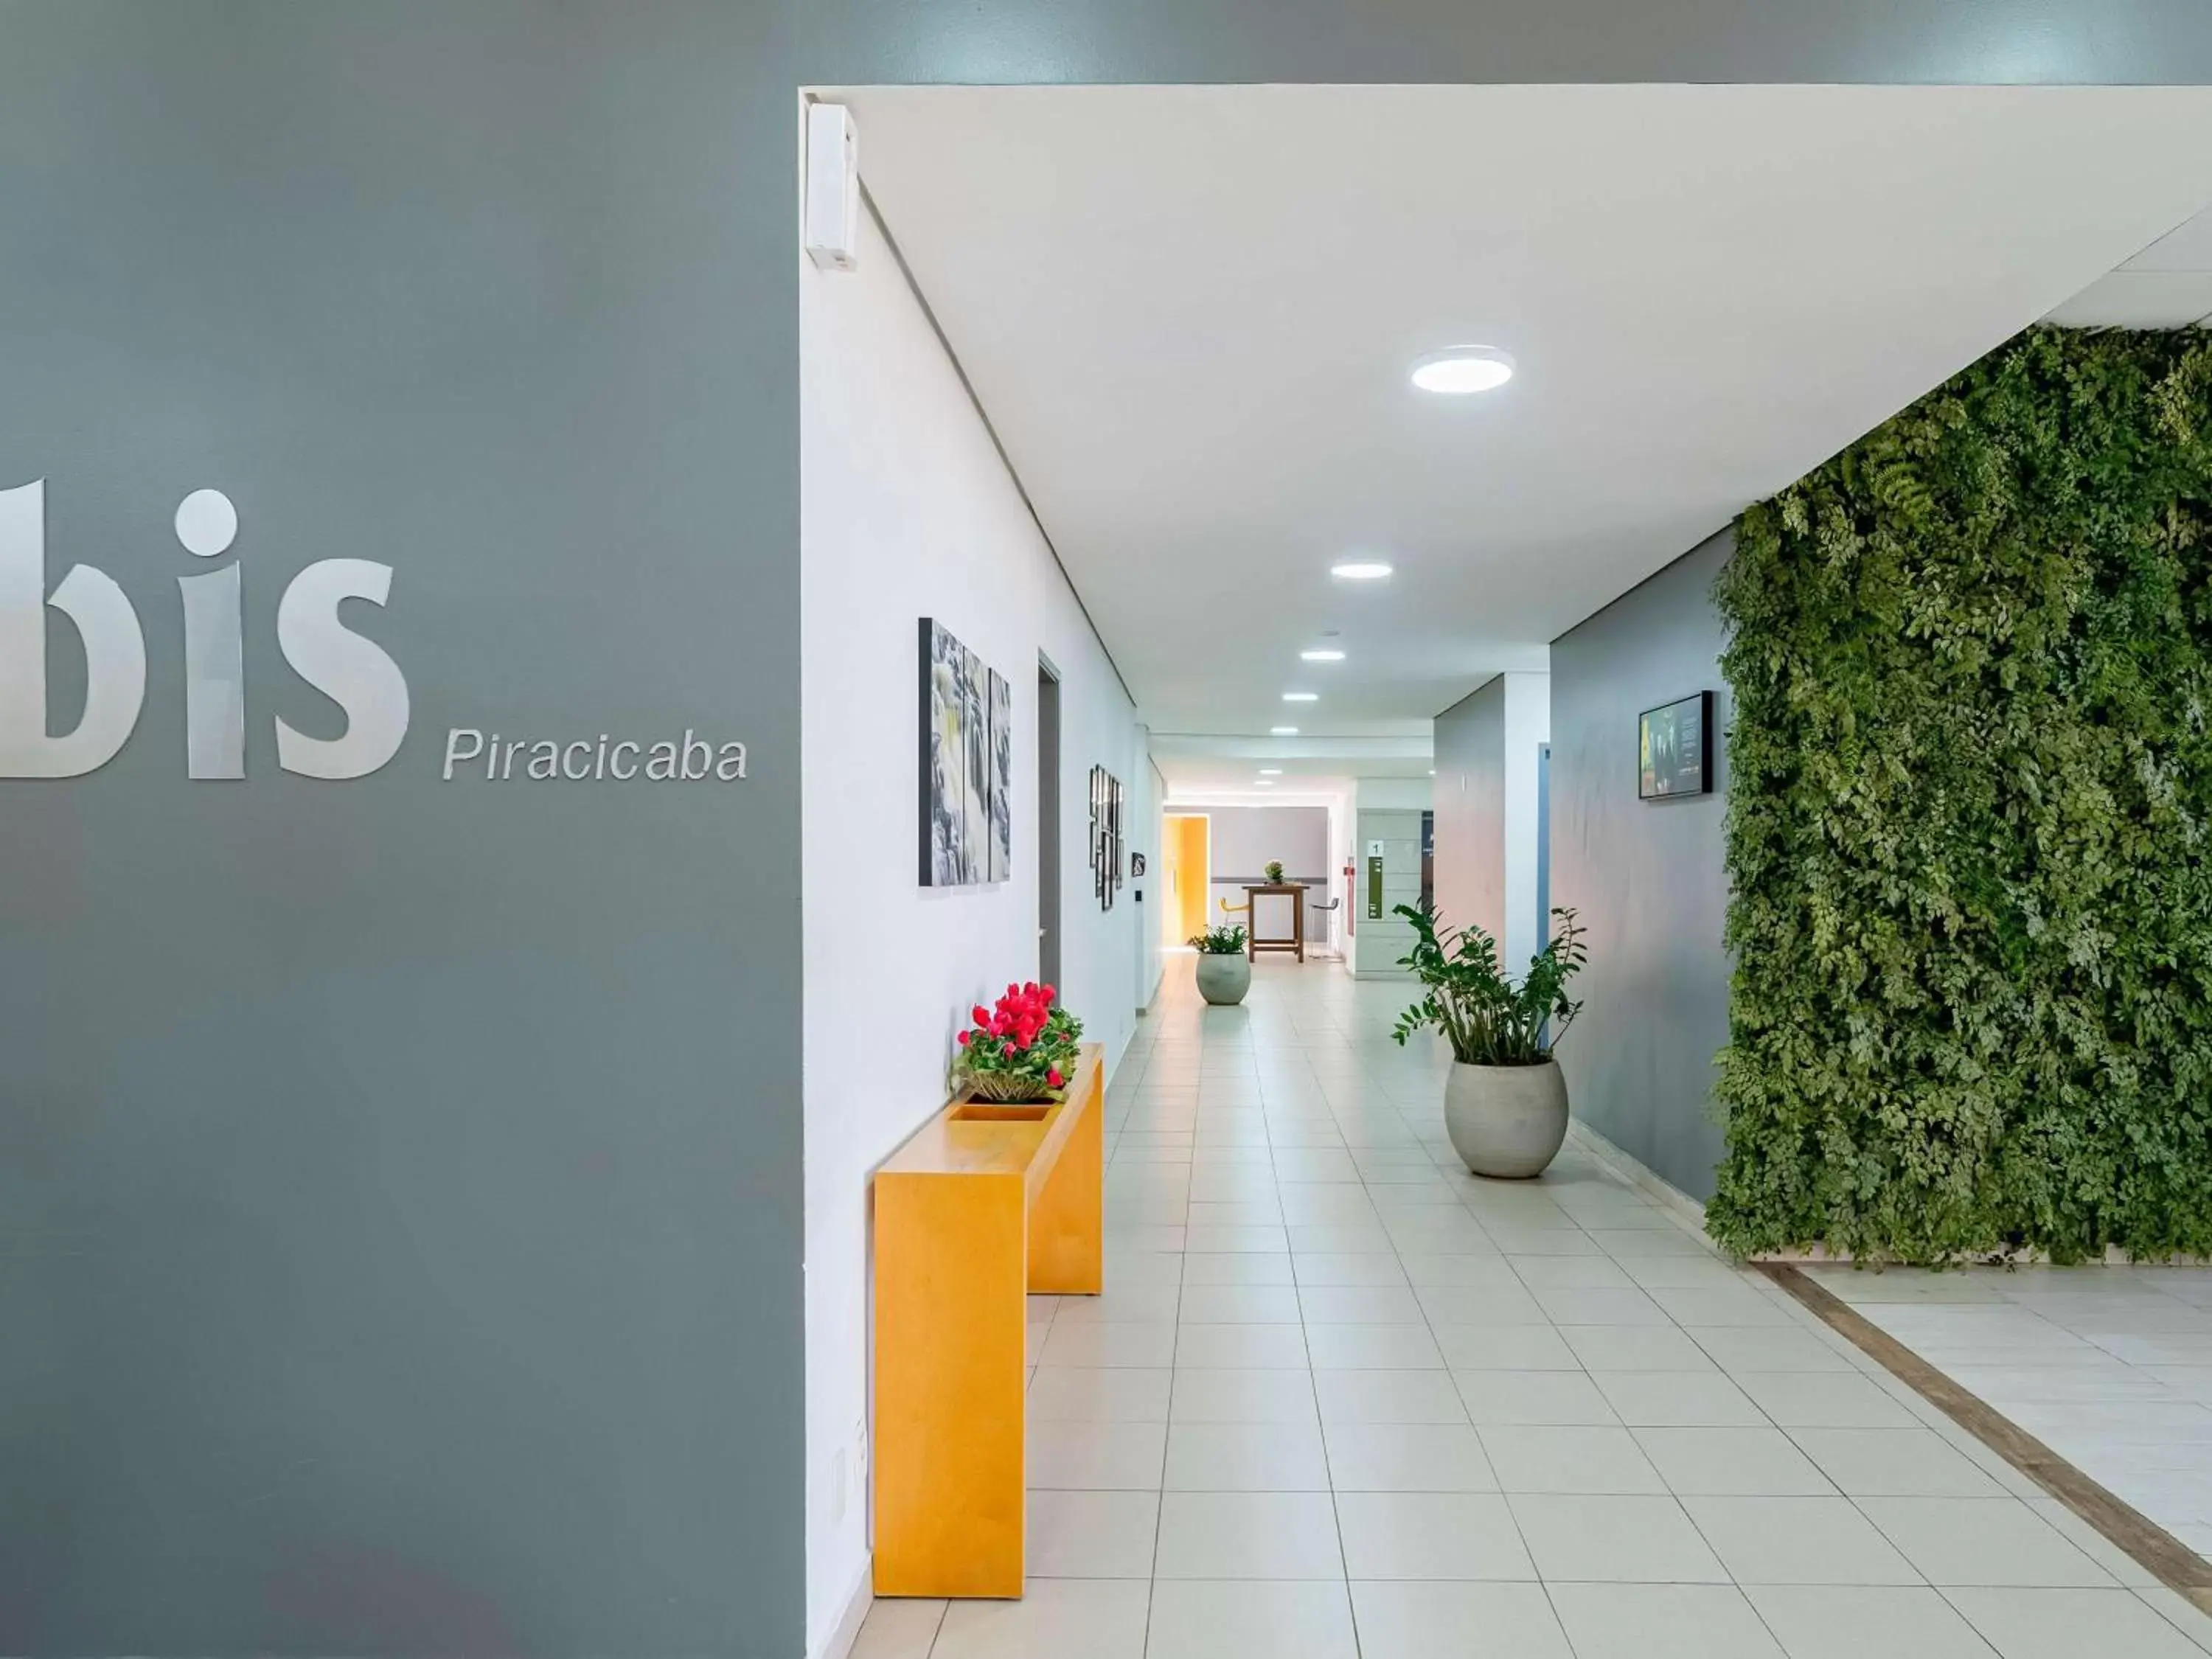 Property building in ibis Piracicaba